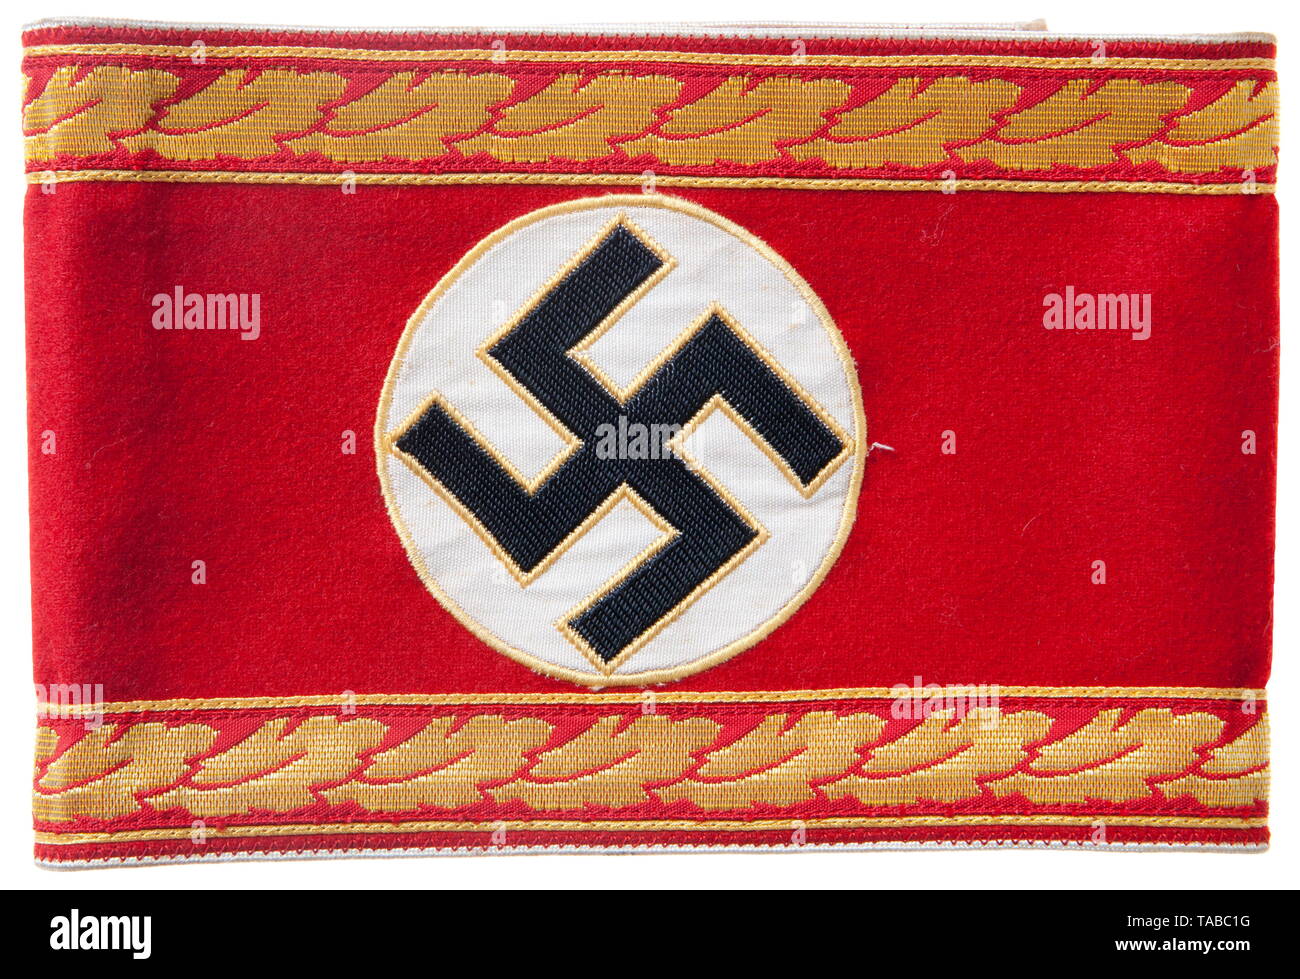 An NSDAP armband for 'Kreisleiter eines Hauptamtes' Red wool, separately applied white disc, multi-piece black swastika edged in gold woven cellon. Bordering top and bottom is a 18 mm wide machine woven horizontal strip of repeating oakleaves edged with gold cellon. Outer edges piped in white rayon. Reverse stamped with orientation stamp and 'oben'. Unsewn, length 52 cm. USA-lot, see page 4. historic, historical, 20th century, 1930s, party organisation, party organization, organisations, organizations, organization, organisation, party, parties, political party, German, Ger, Editorial-Use-Only Stock Photo